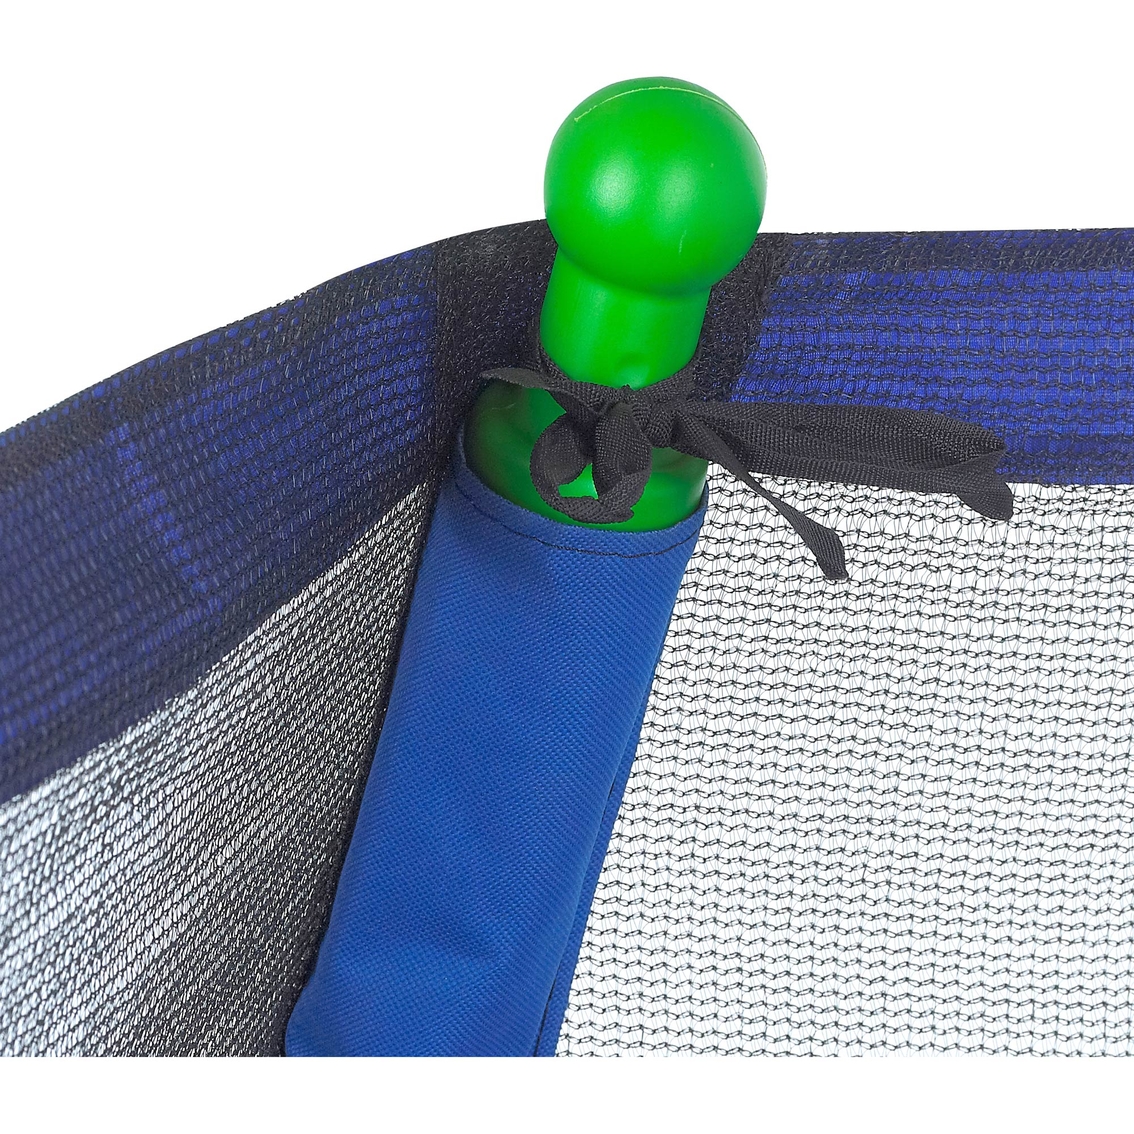 UpperBounce 7 Ft. Indoor/Outdoor Classic Trampoline and Enclosure Set - Image 3 of 4